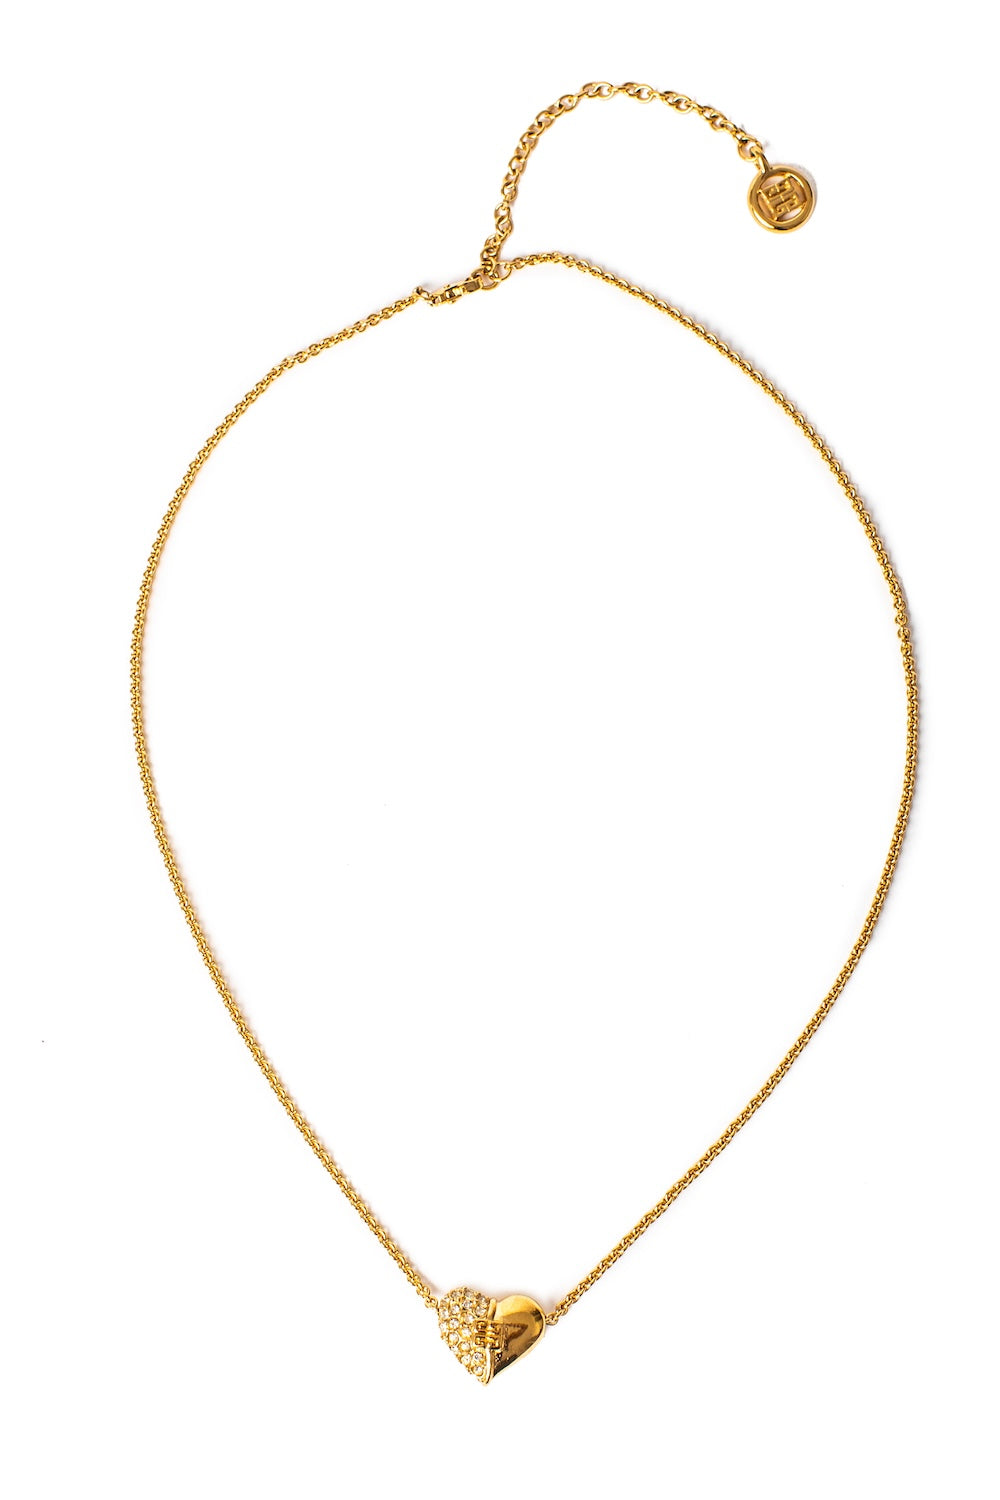 Givenchy <br> 80's logo crystal studded heart gold chain necklace